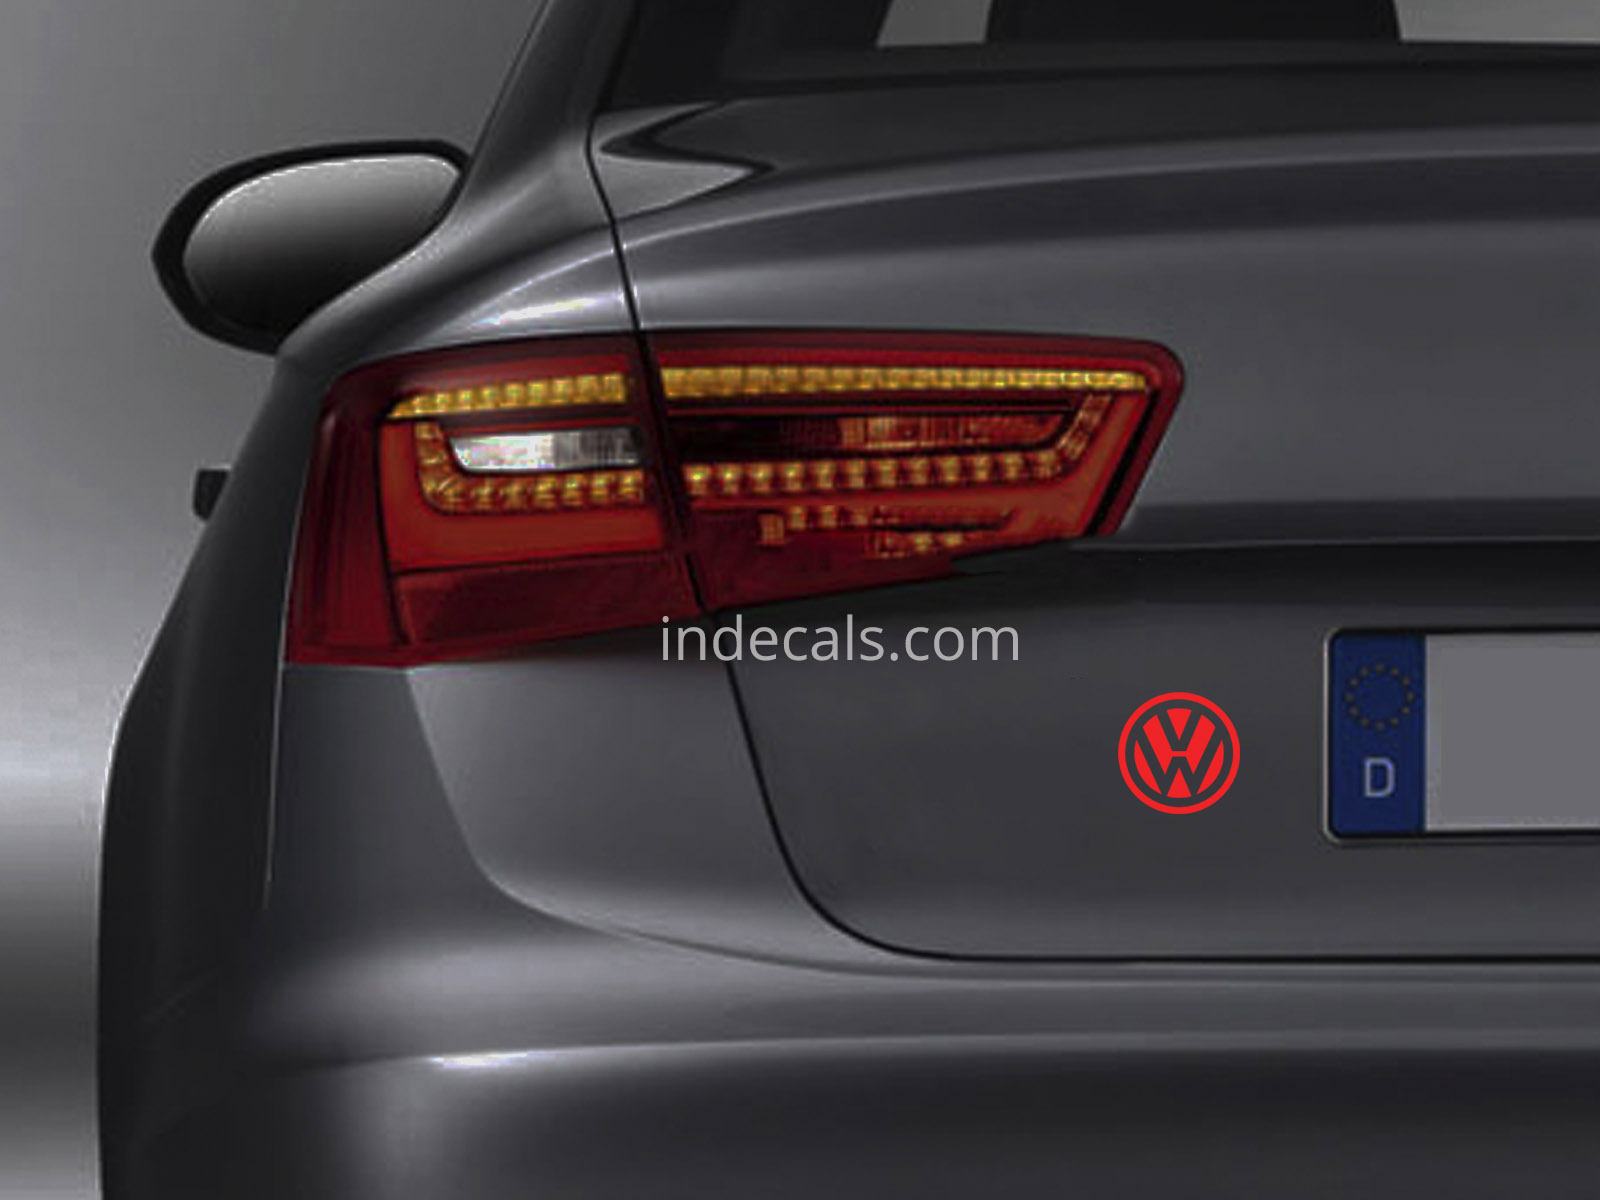 3 x Volkswagen Stickers for Trunk - Red